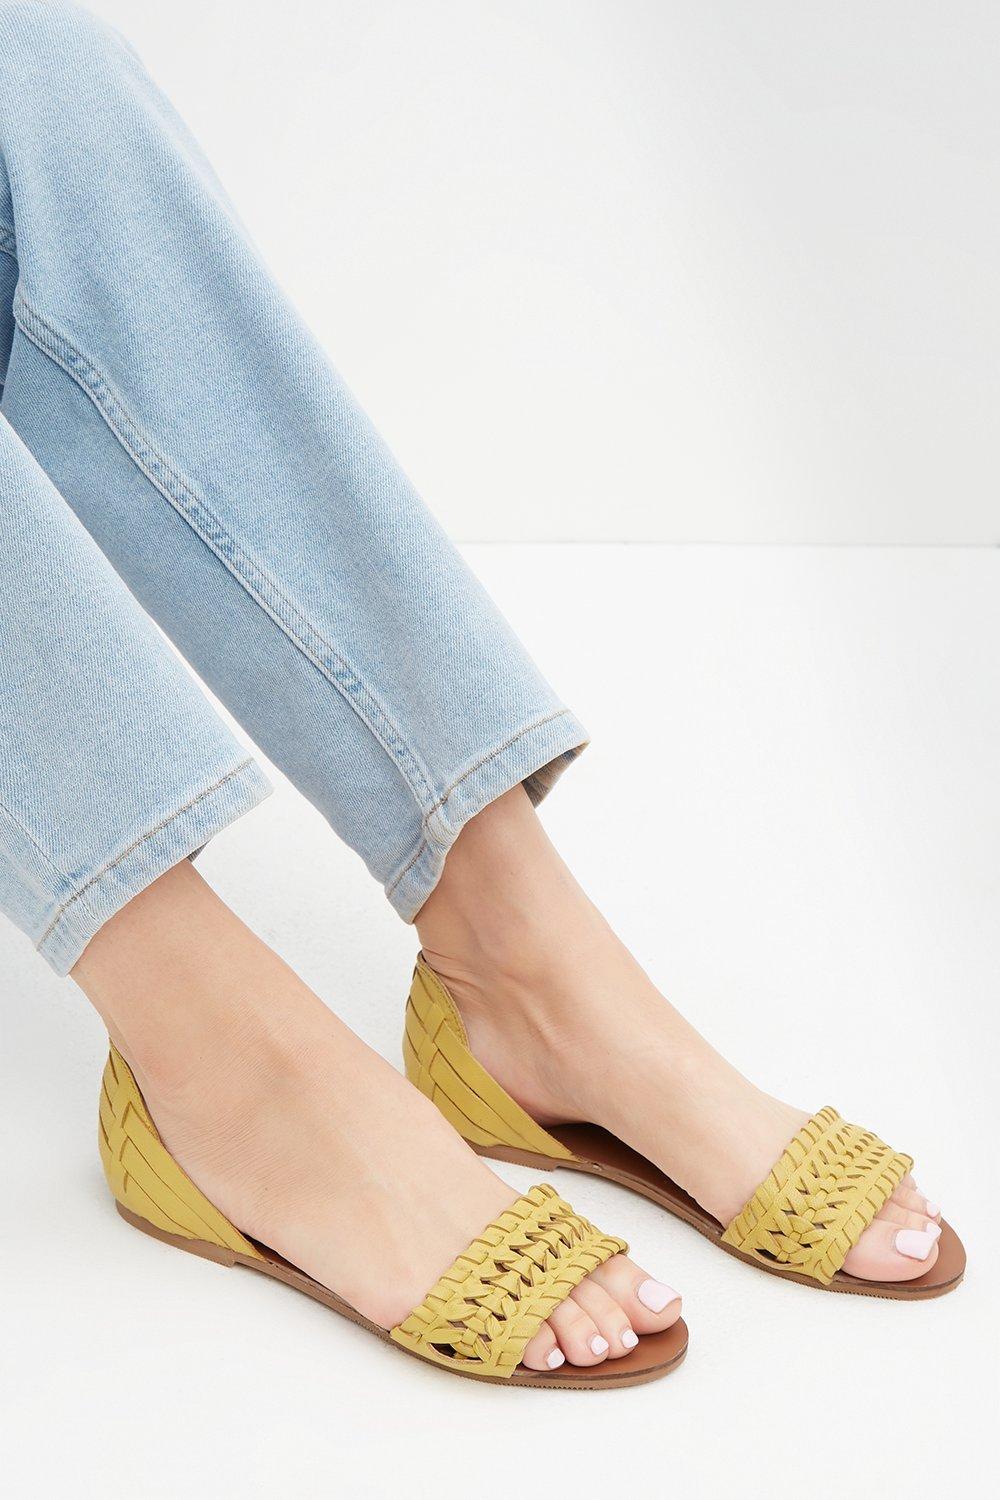 yellow sandals wide fit